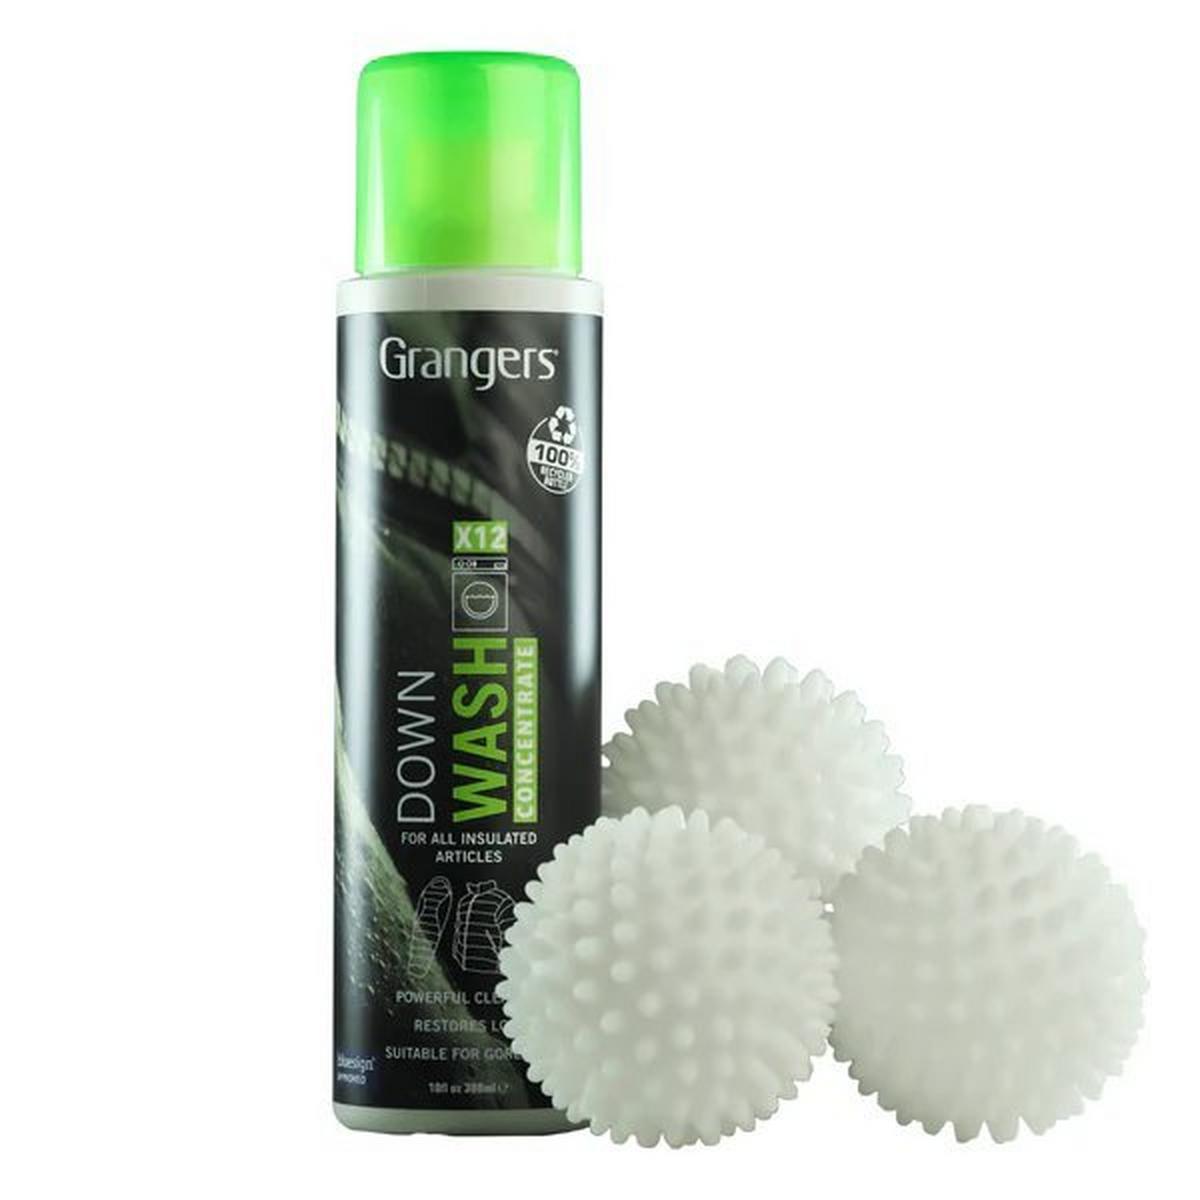 Grangers Complete Down Wash & Reproof Kit